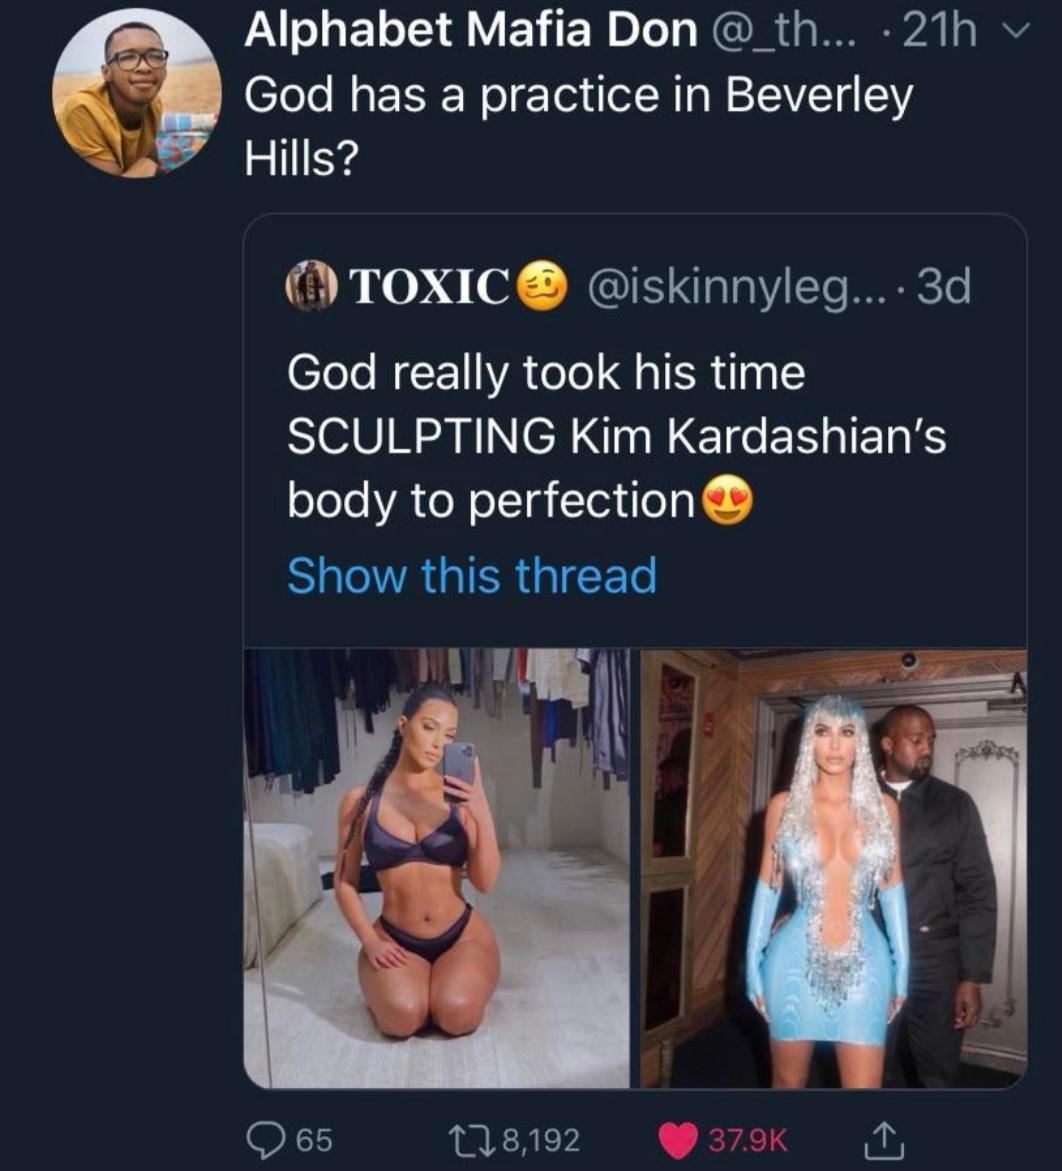 muscle - Alphabet Mafia Don ... 21h v God has a practice in Beverley Hills? Toxic@ .... 3d God really took his time Sculpting Kim Kardashian's body to perfection Show this thread '965 178,192 1